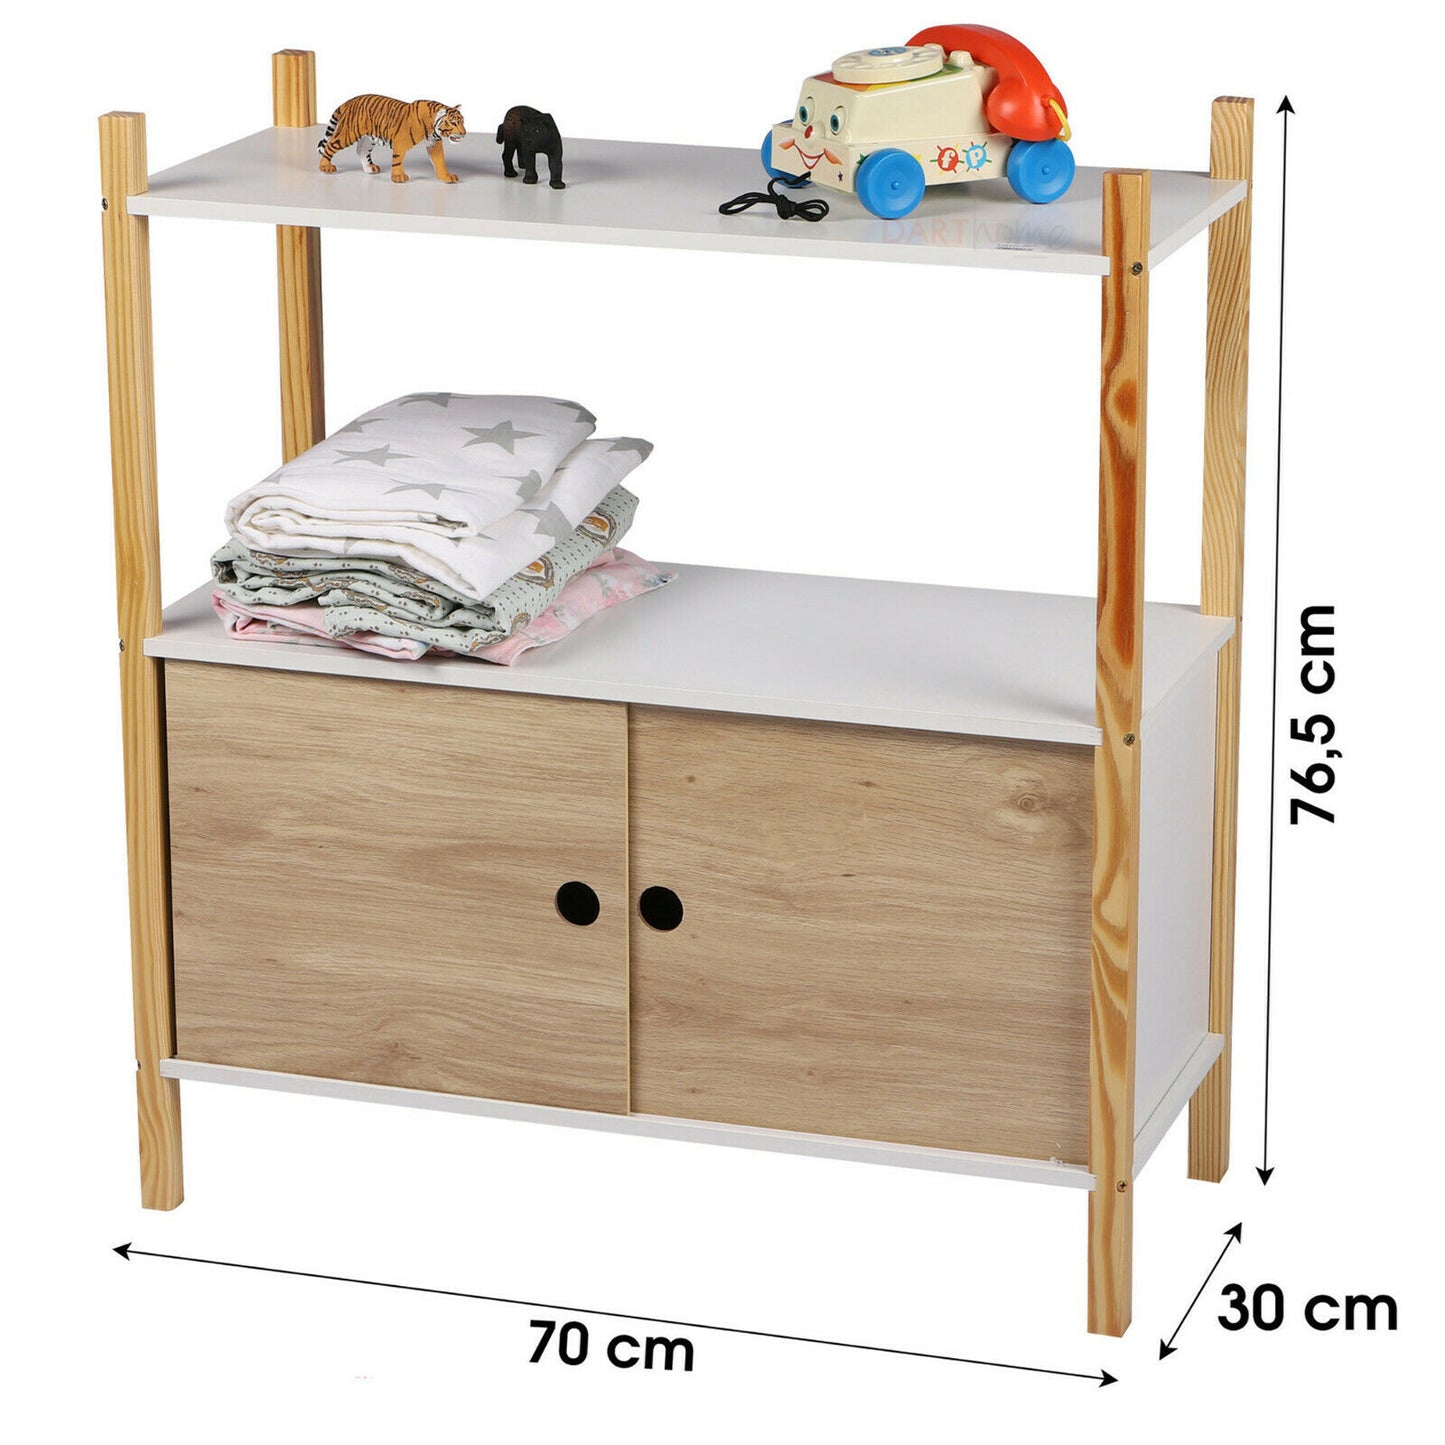 Childrens Storage Cabinet With Shelving